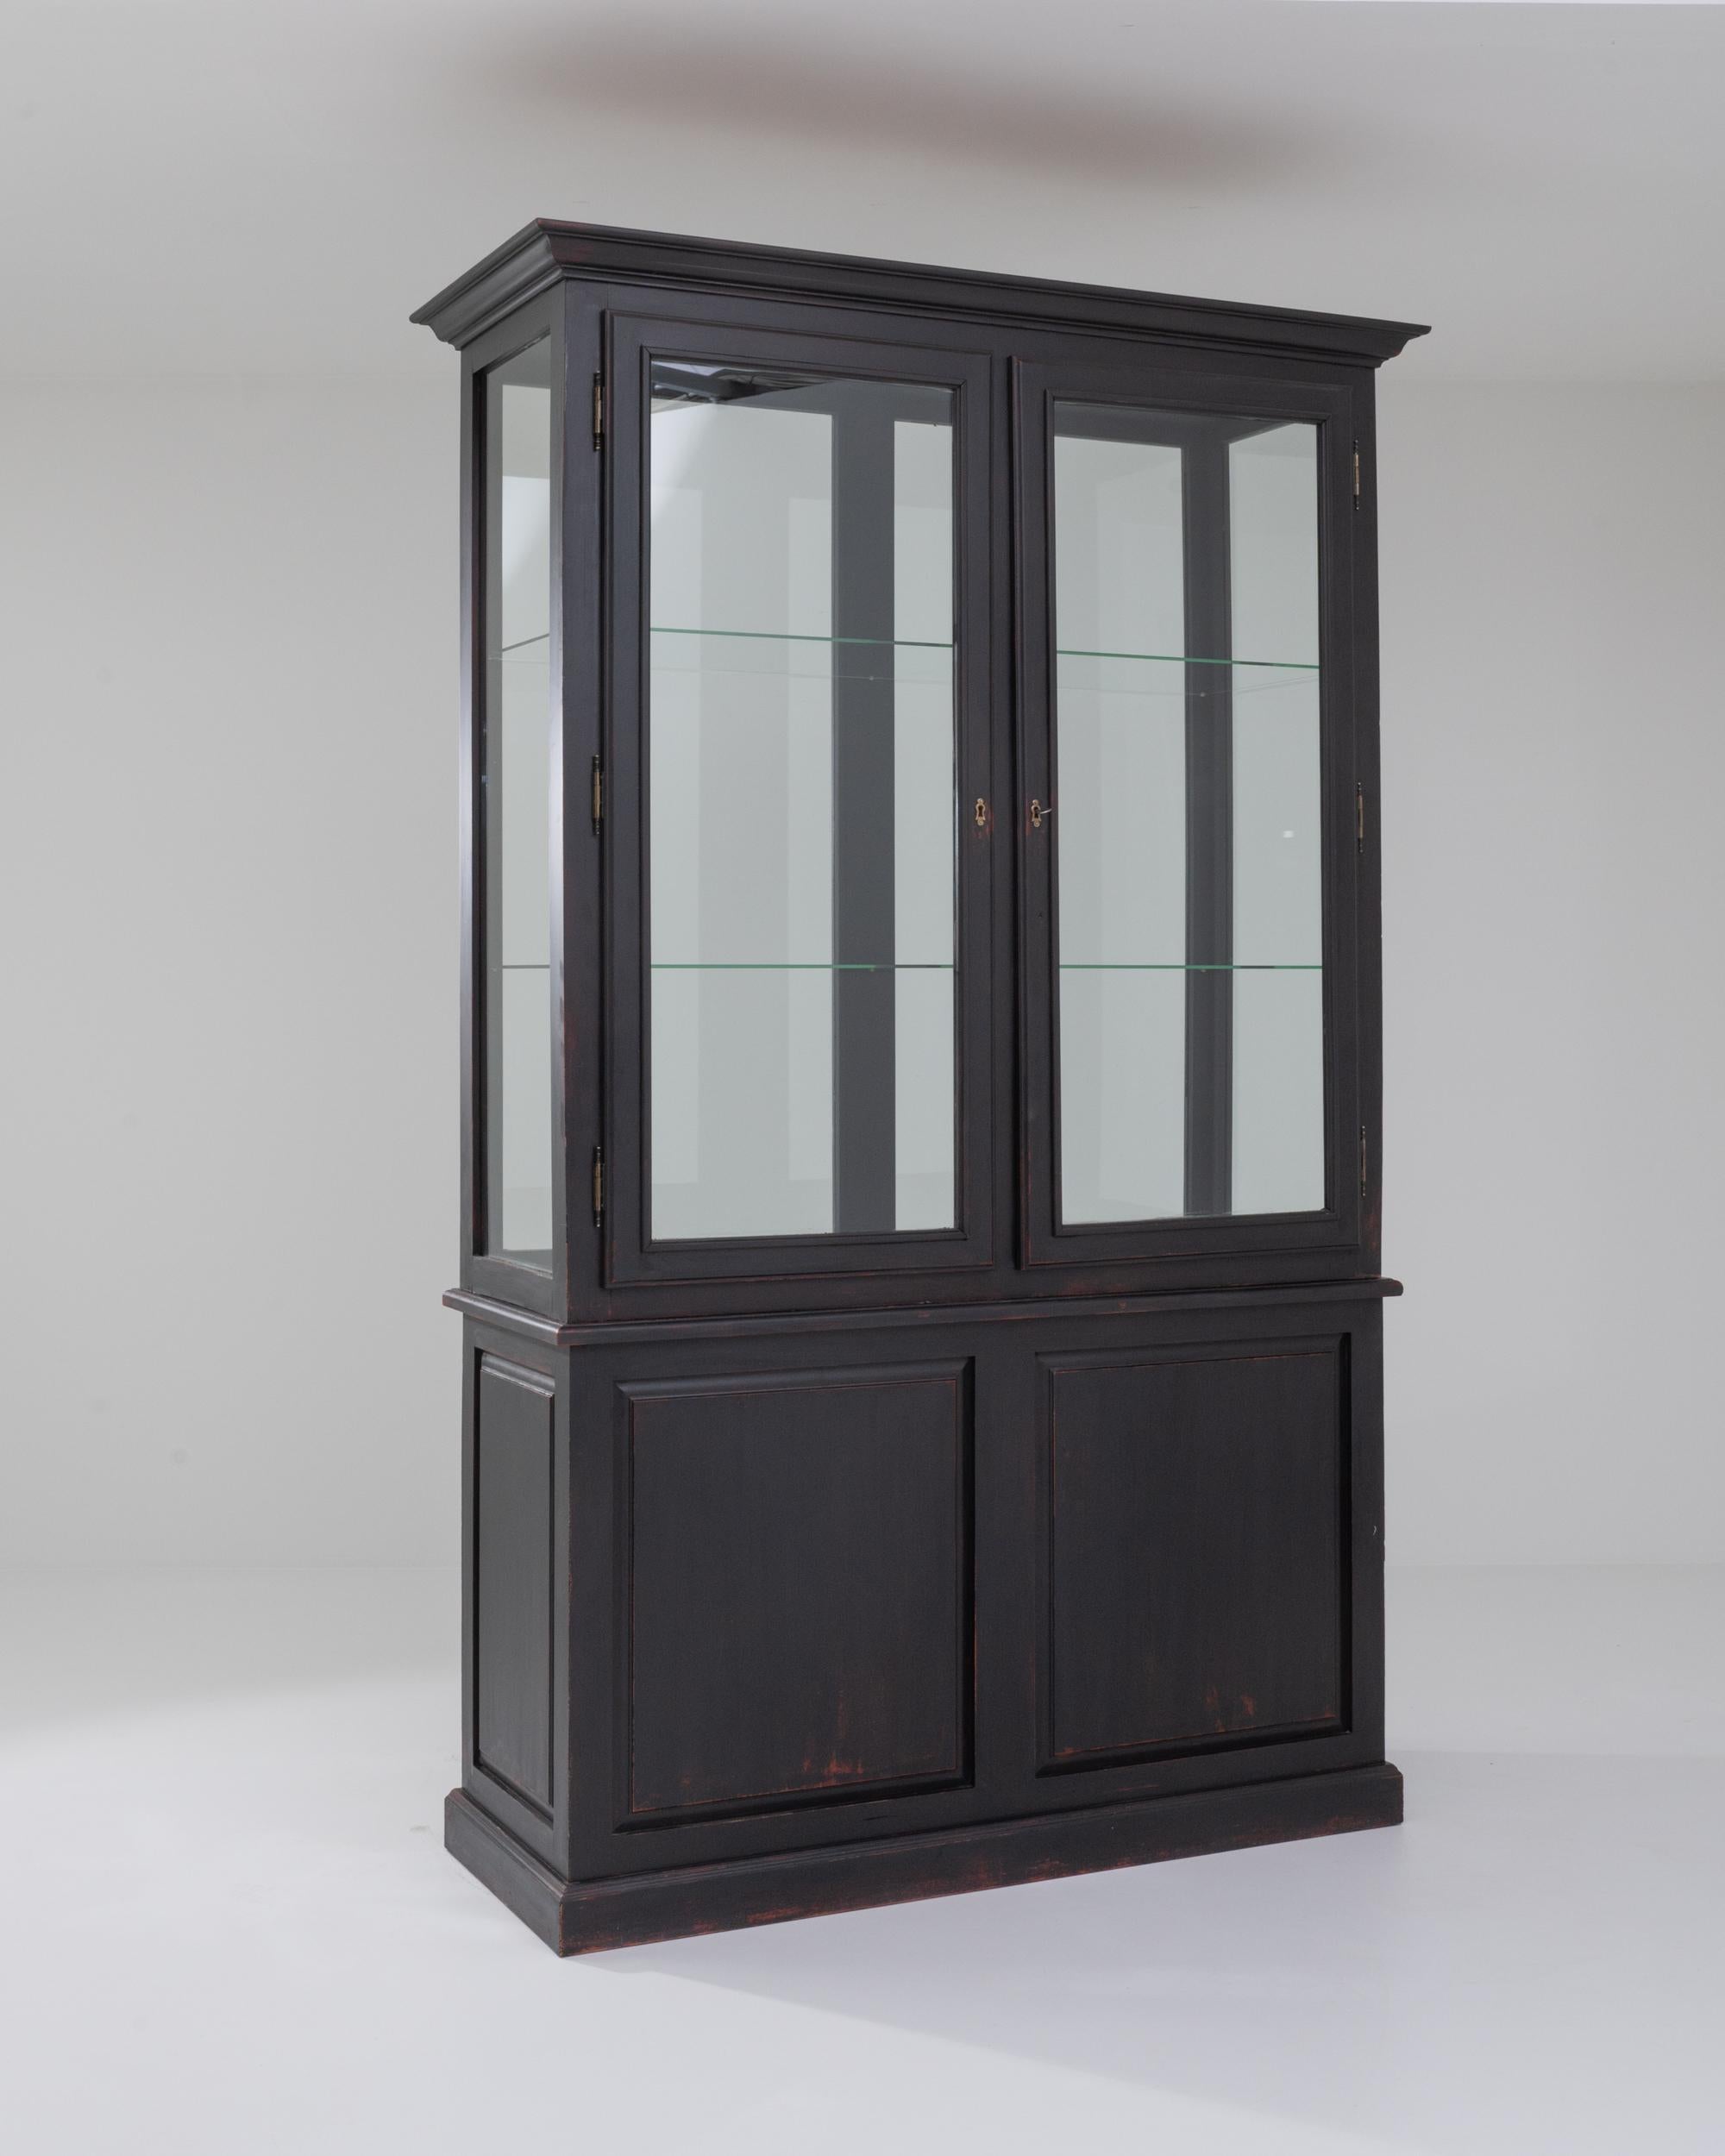 Tall and elegant, this vintage vitrine makes an ideal display case. Built in France in the 20th century, the design has an attractive simplicity: clean lines and the stylish black finish of the wood astutely frame the glass shelves without